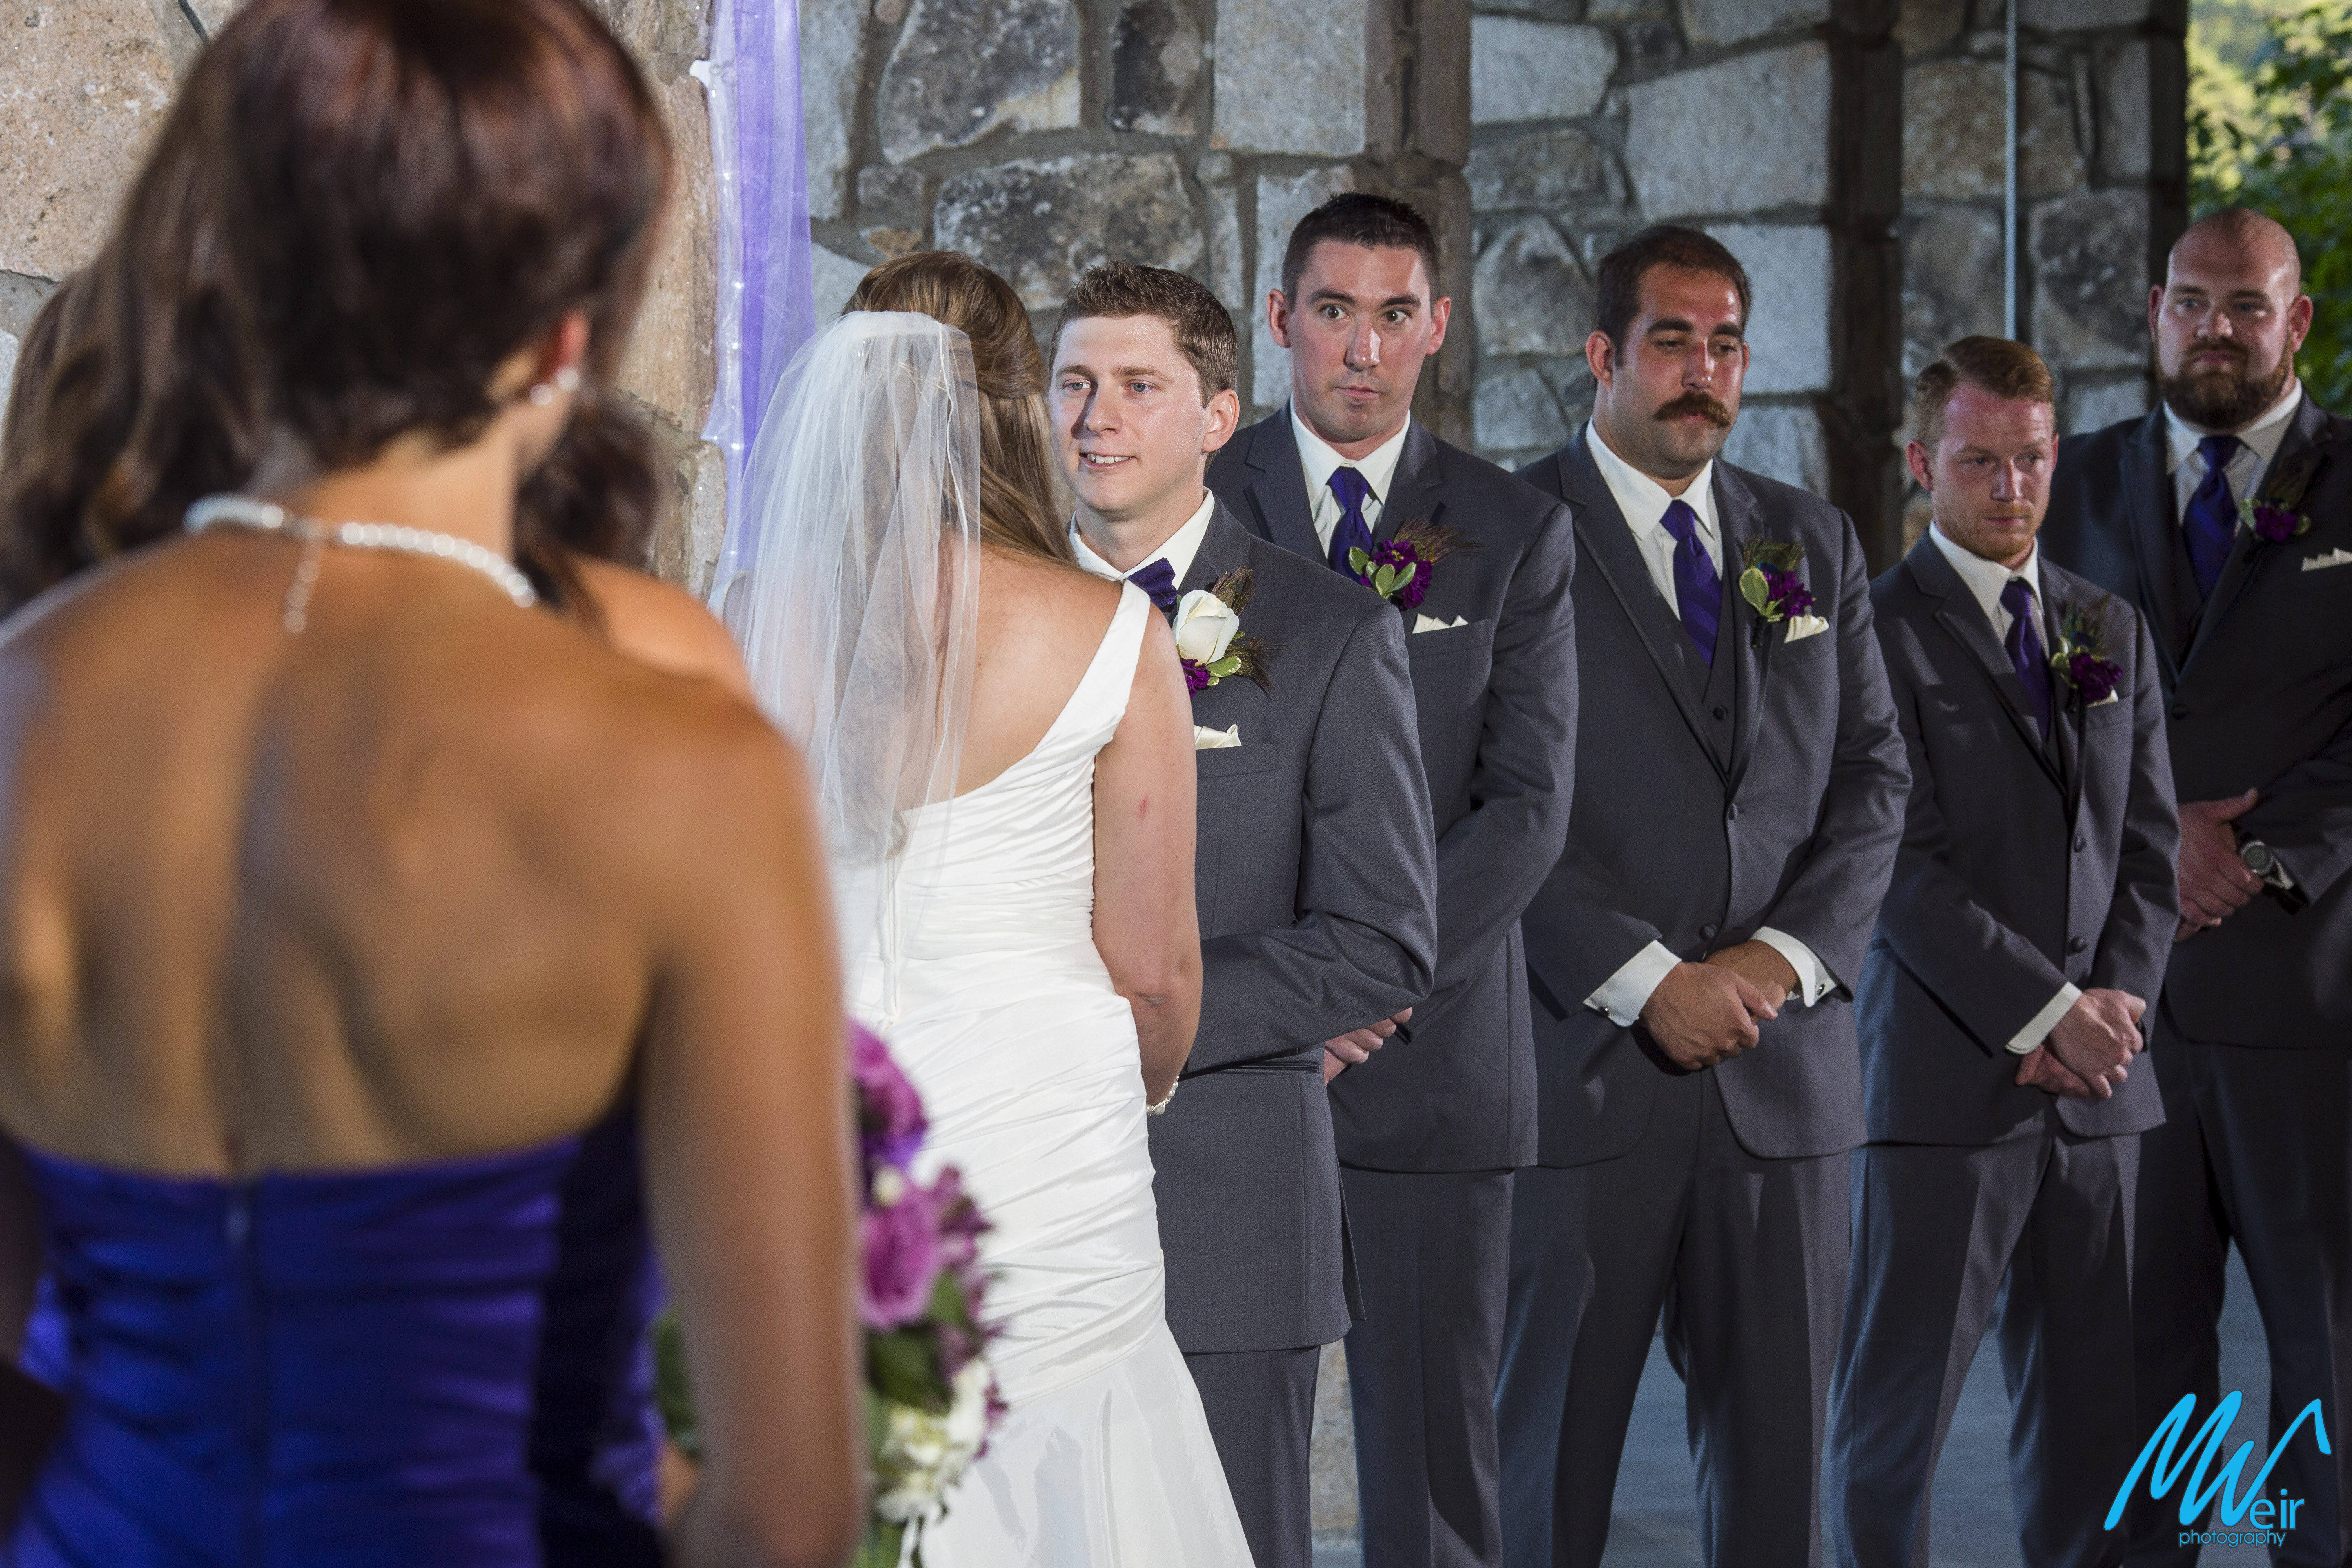 groom looks at bride during wedding ceremony